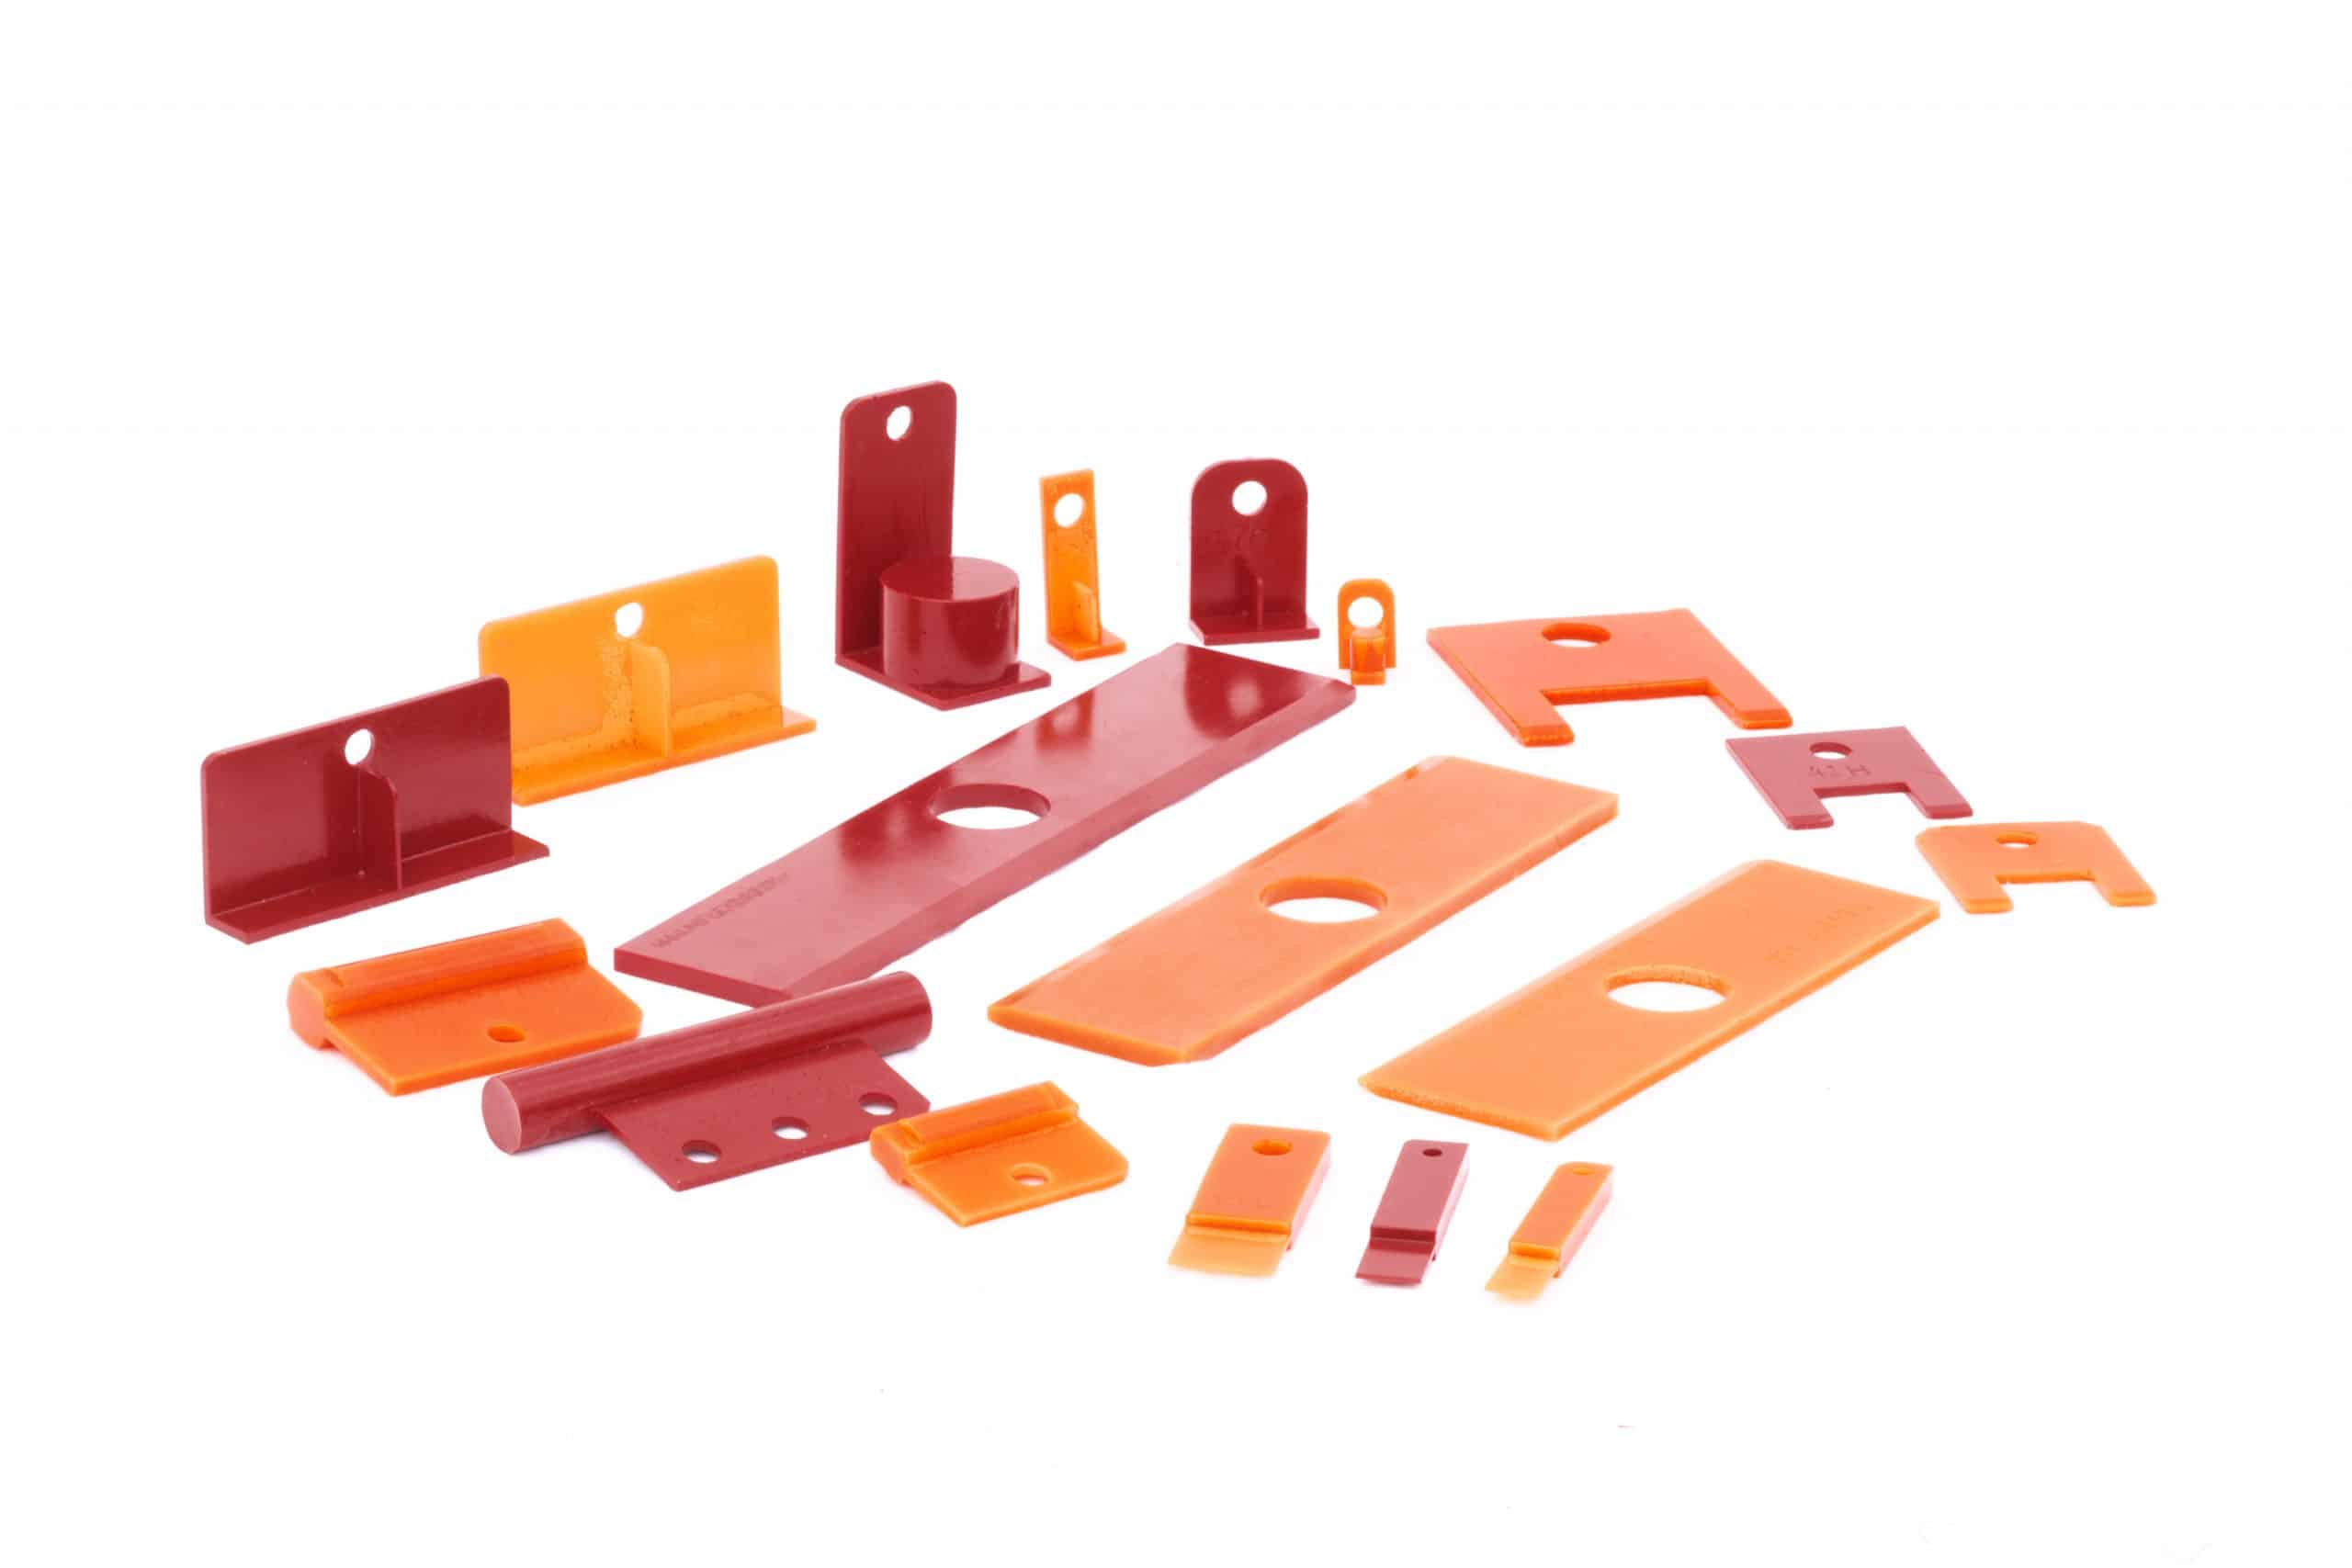 Various red and safety orange LOTO devices used in electrical work.